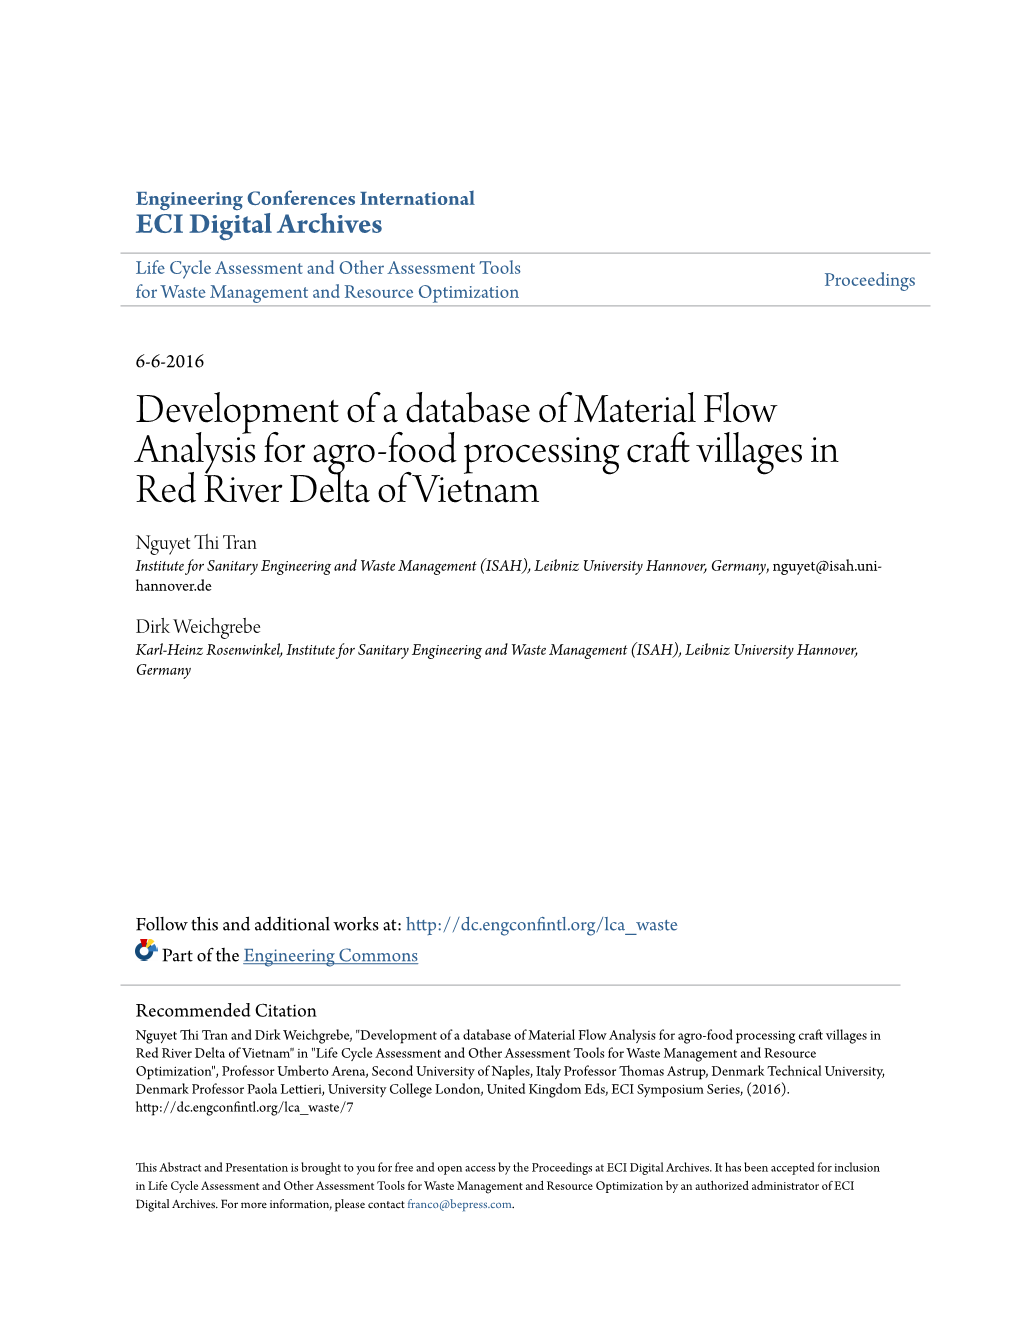 Development of a Database of Material Flow Analysis for Agroâ